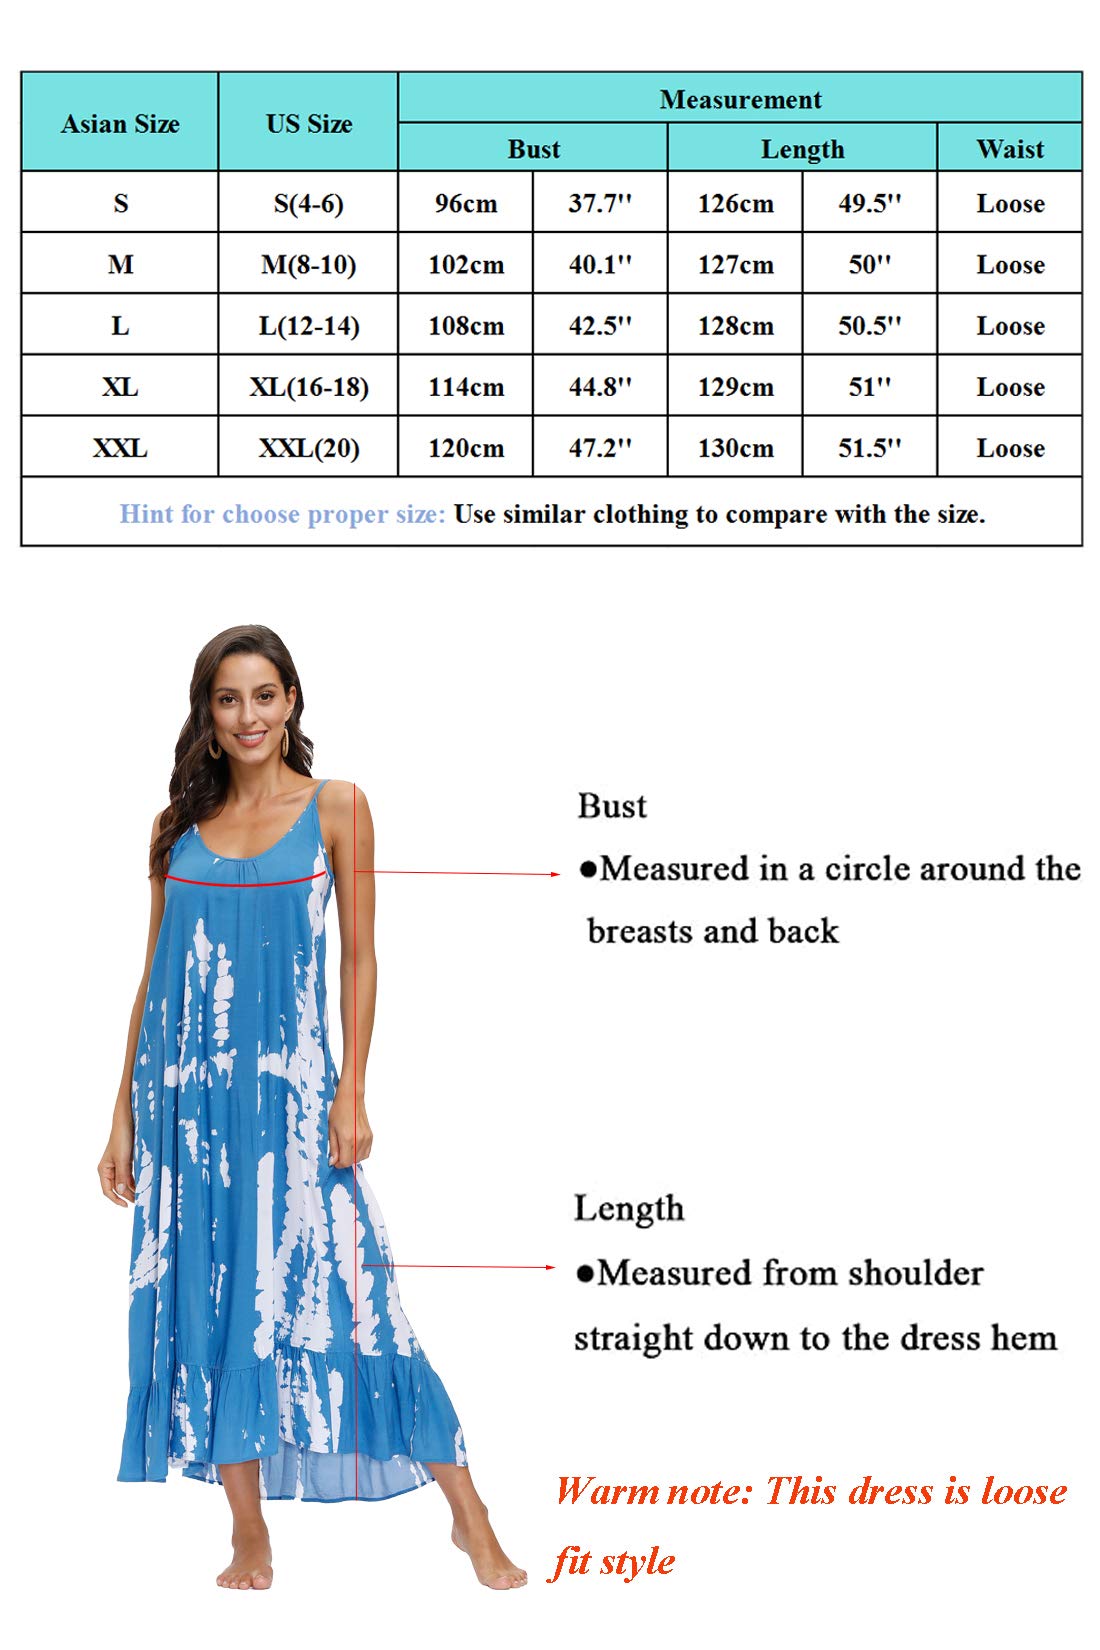 wexcen Women's V-Neck Floral Print Spaghetti Strap Boho Beach Long Maxi Summer Casual Dress with Pockets